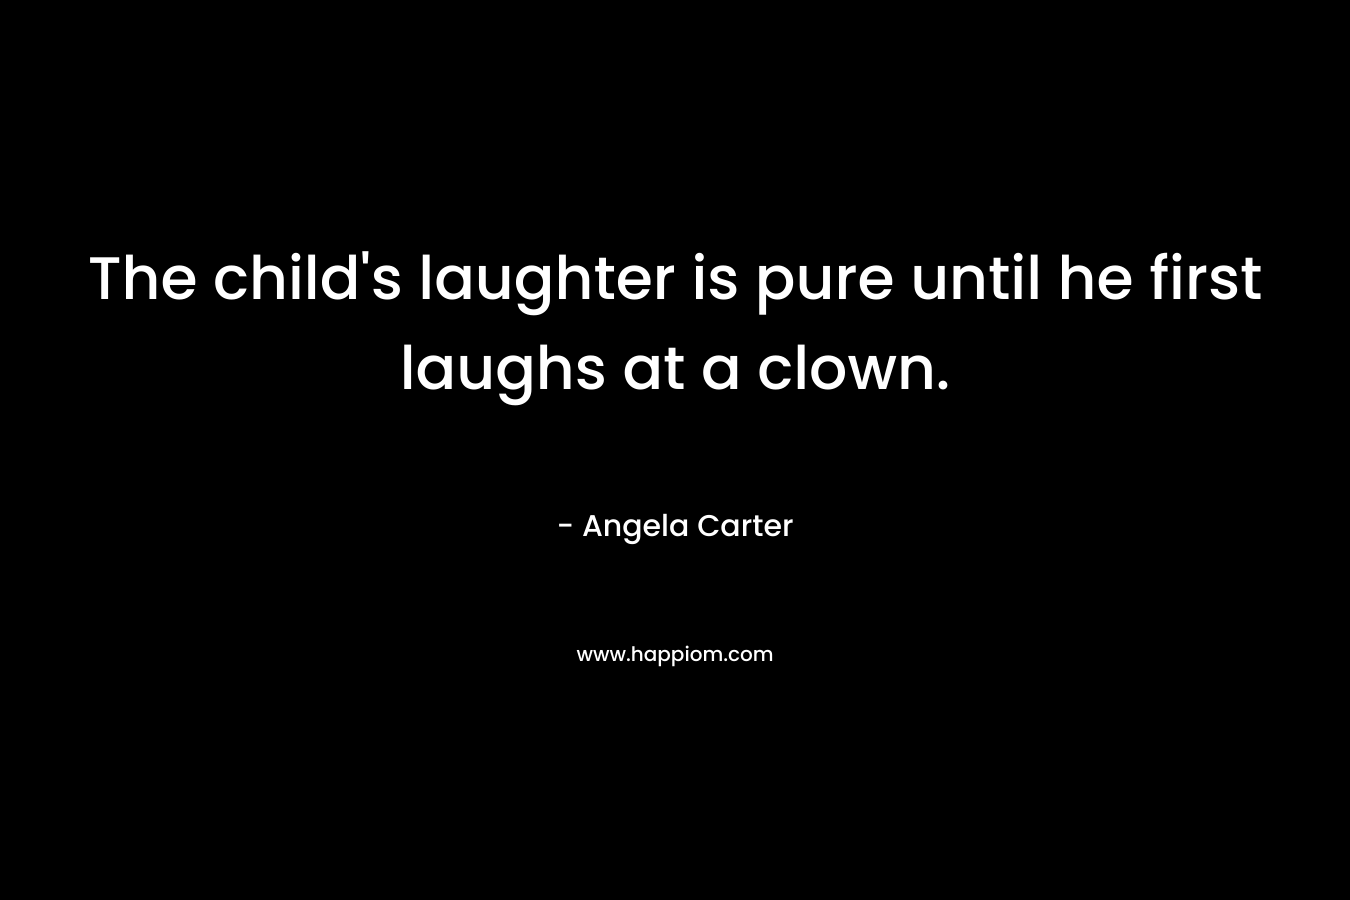 The child's laughter is pure until he first laughs at a clown.